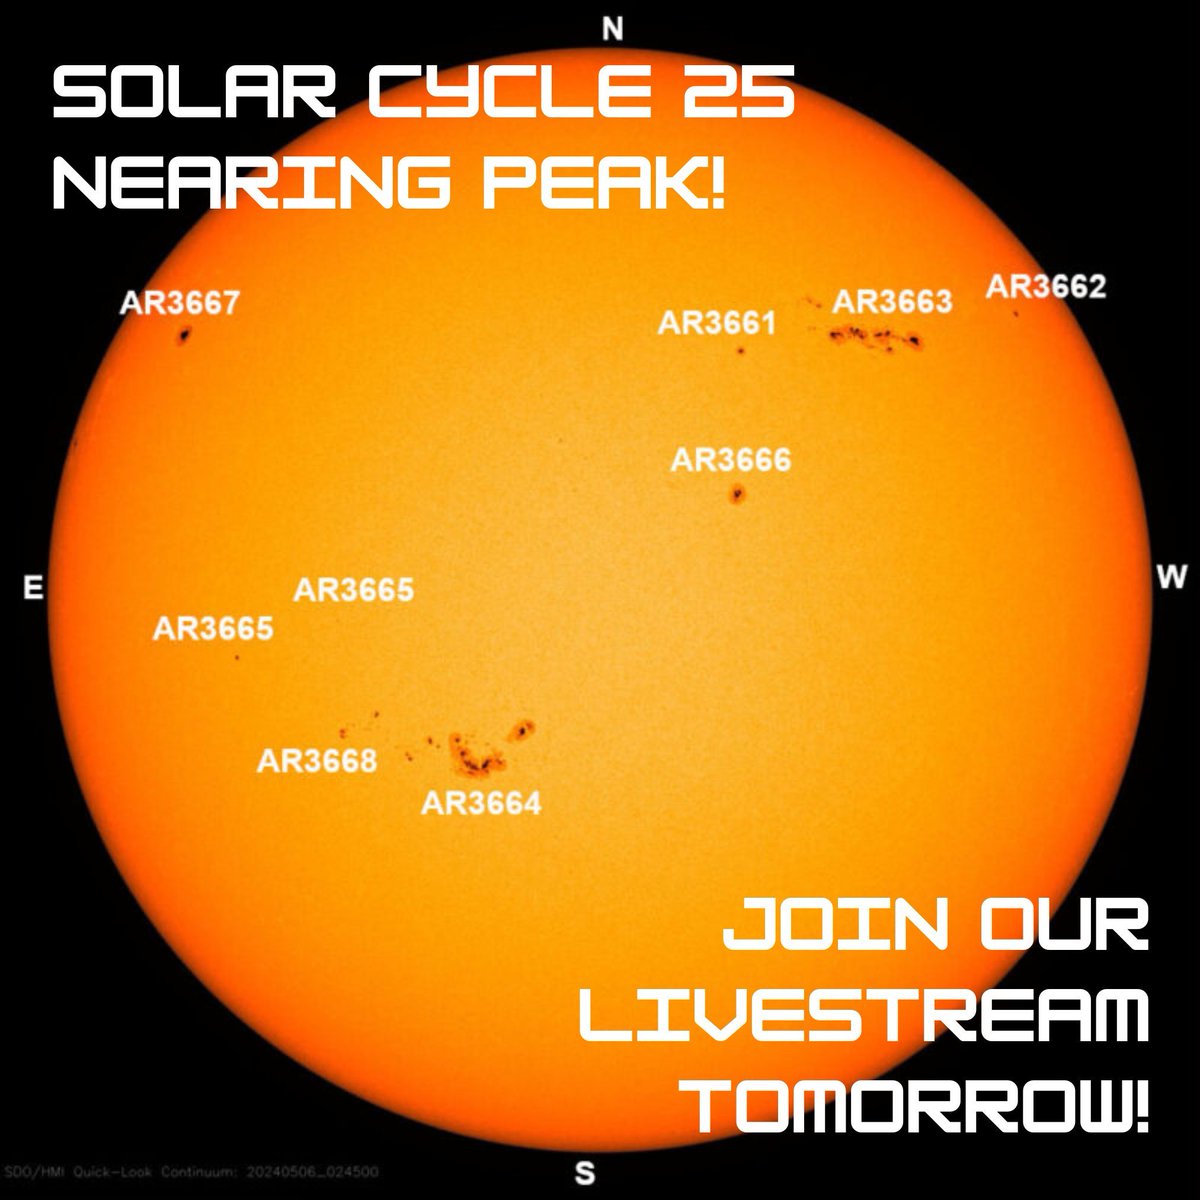 Submit your questions! 🙋 The sun has been blasting off multiple X flares over the past few days. Is Solar Cycle 25 reaching a peak? We'll be speaking with heliophysicist Dr. C. Alex Young during our livestream tomorrow at 5:30pm CDT. ☀️ Watch here! youtube.com/watch?v=xrypqL…